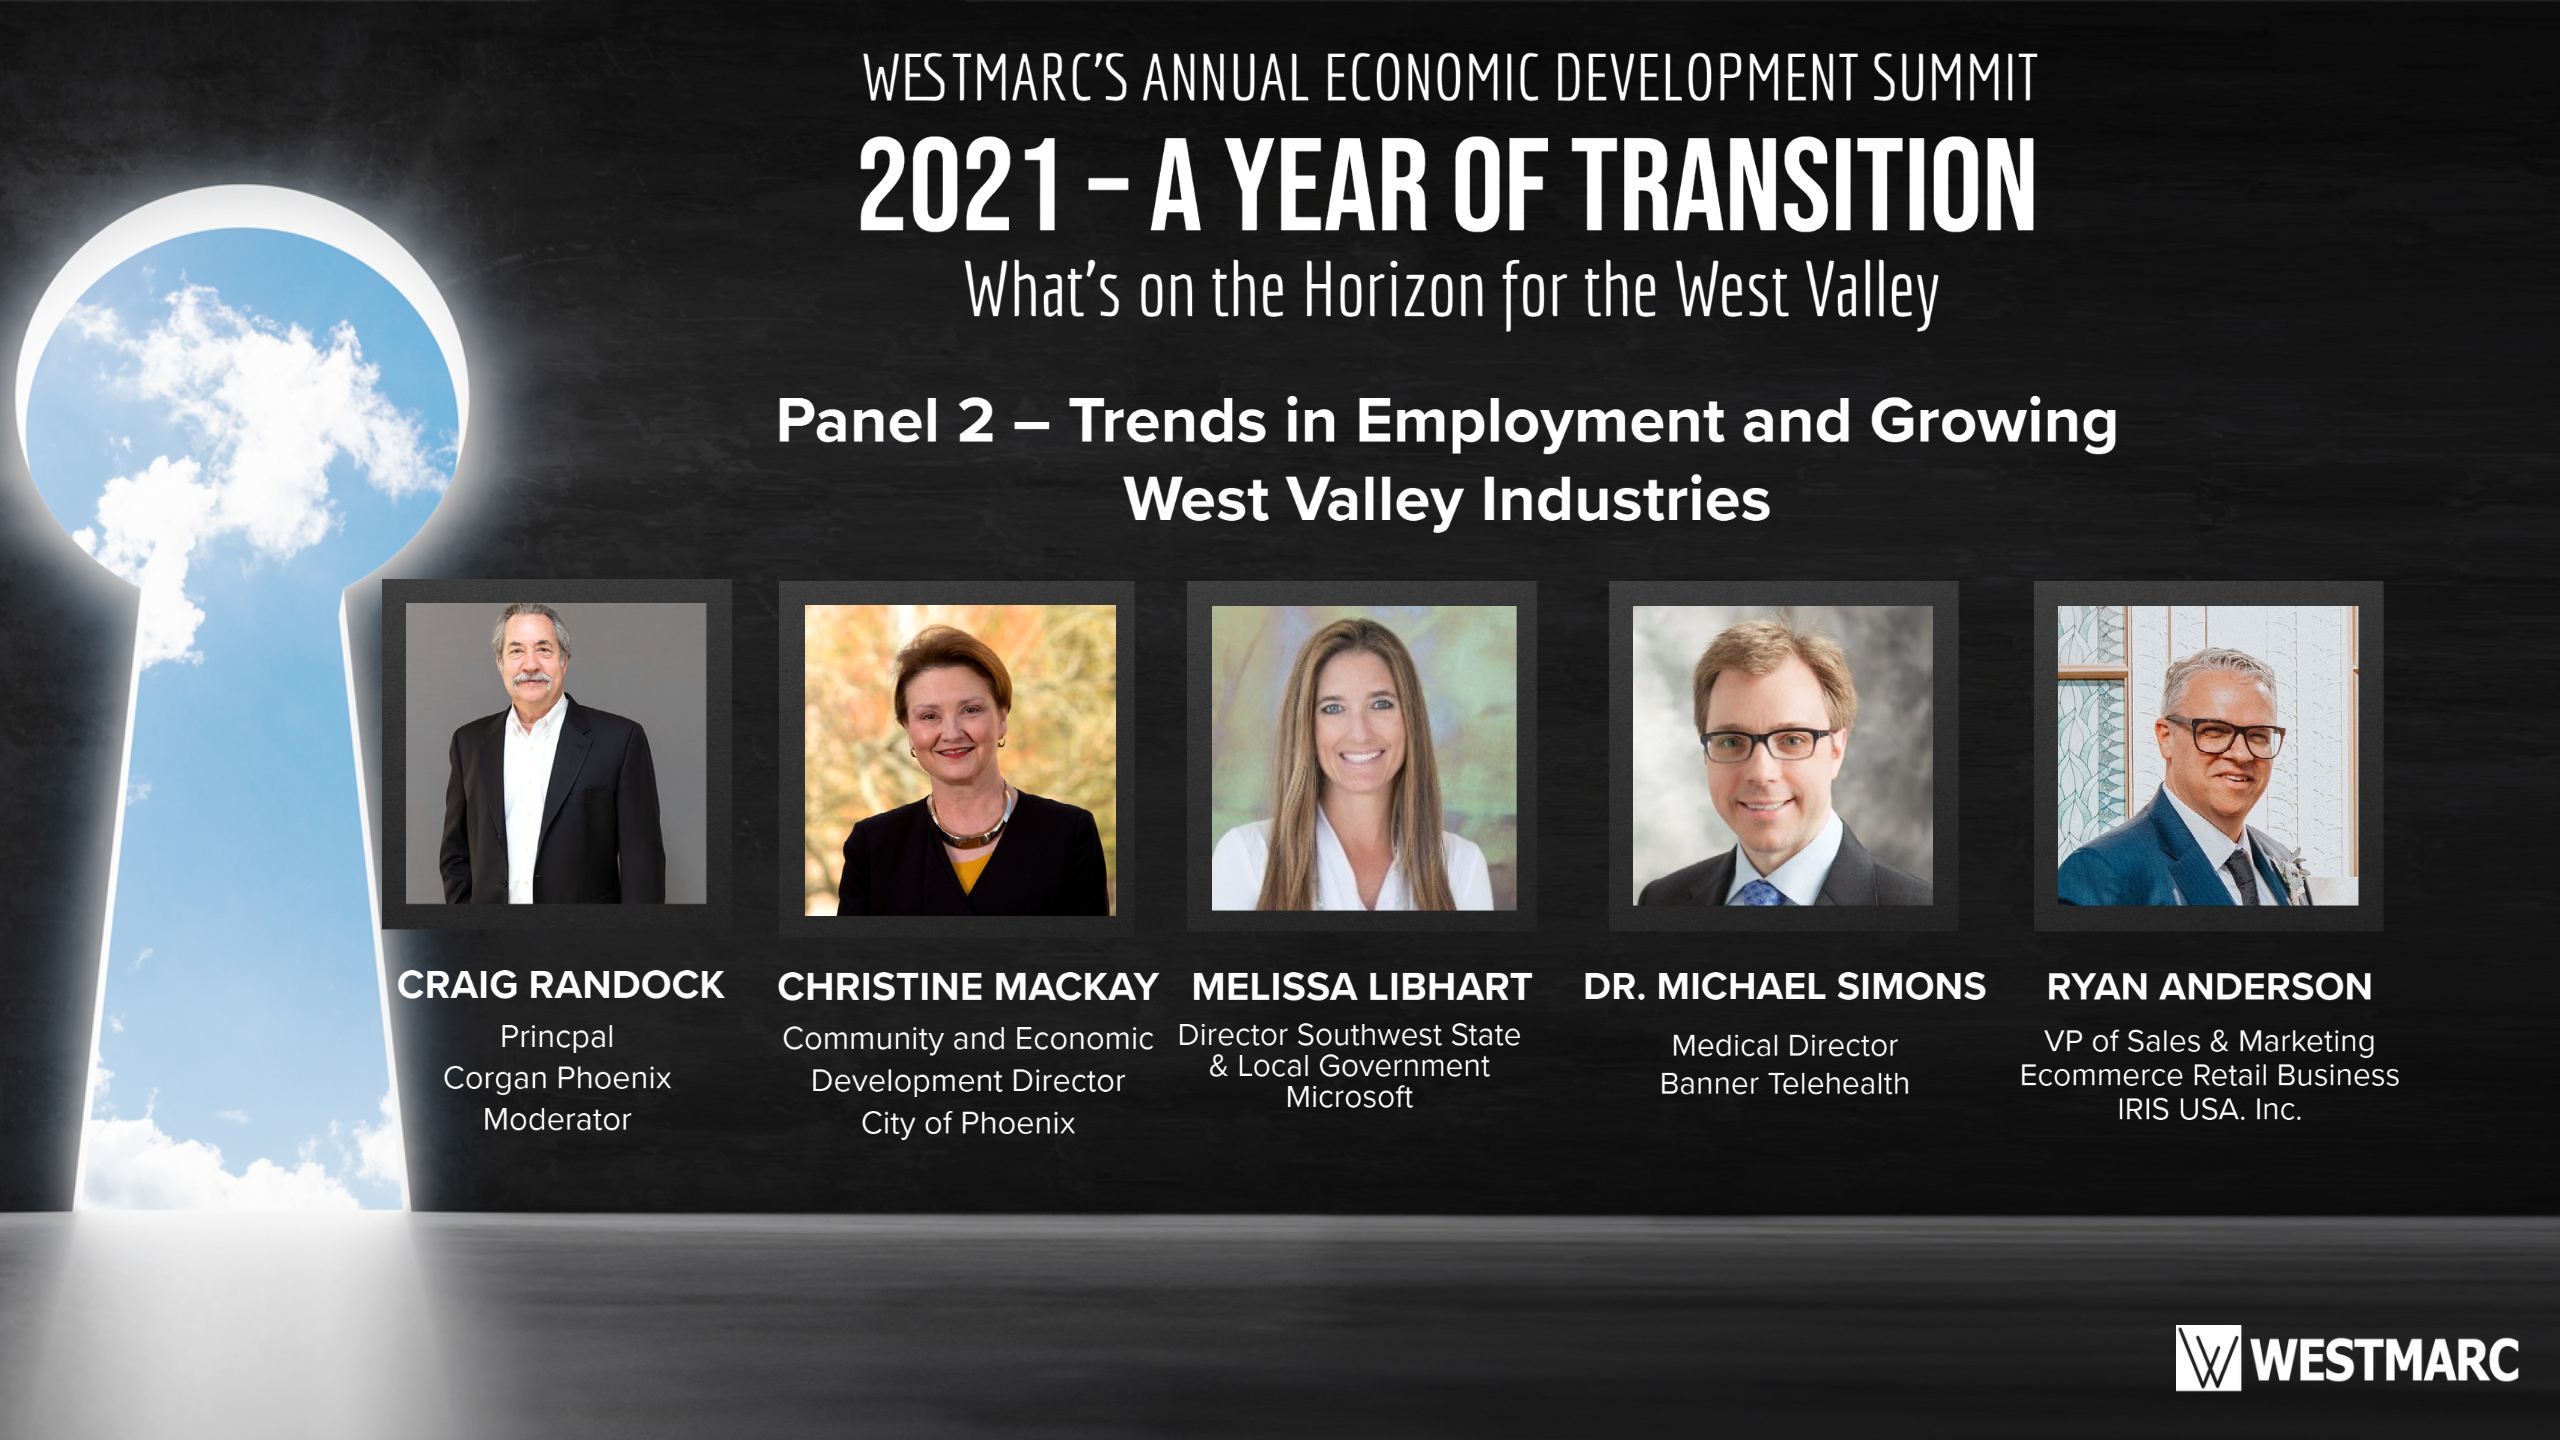 Panel 2 - Trends in Employment and Growing West Valley Industries